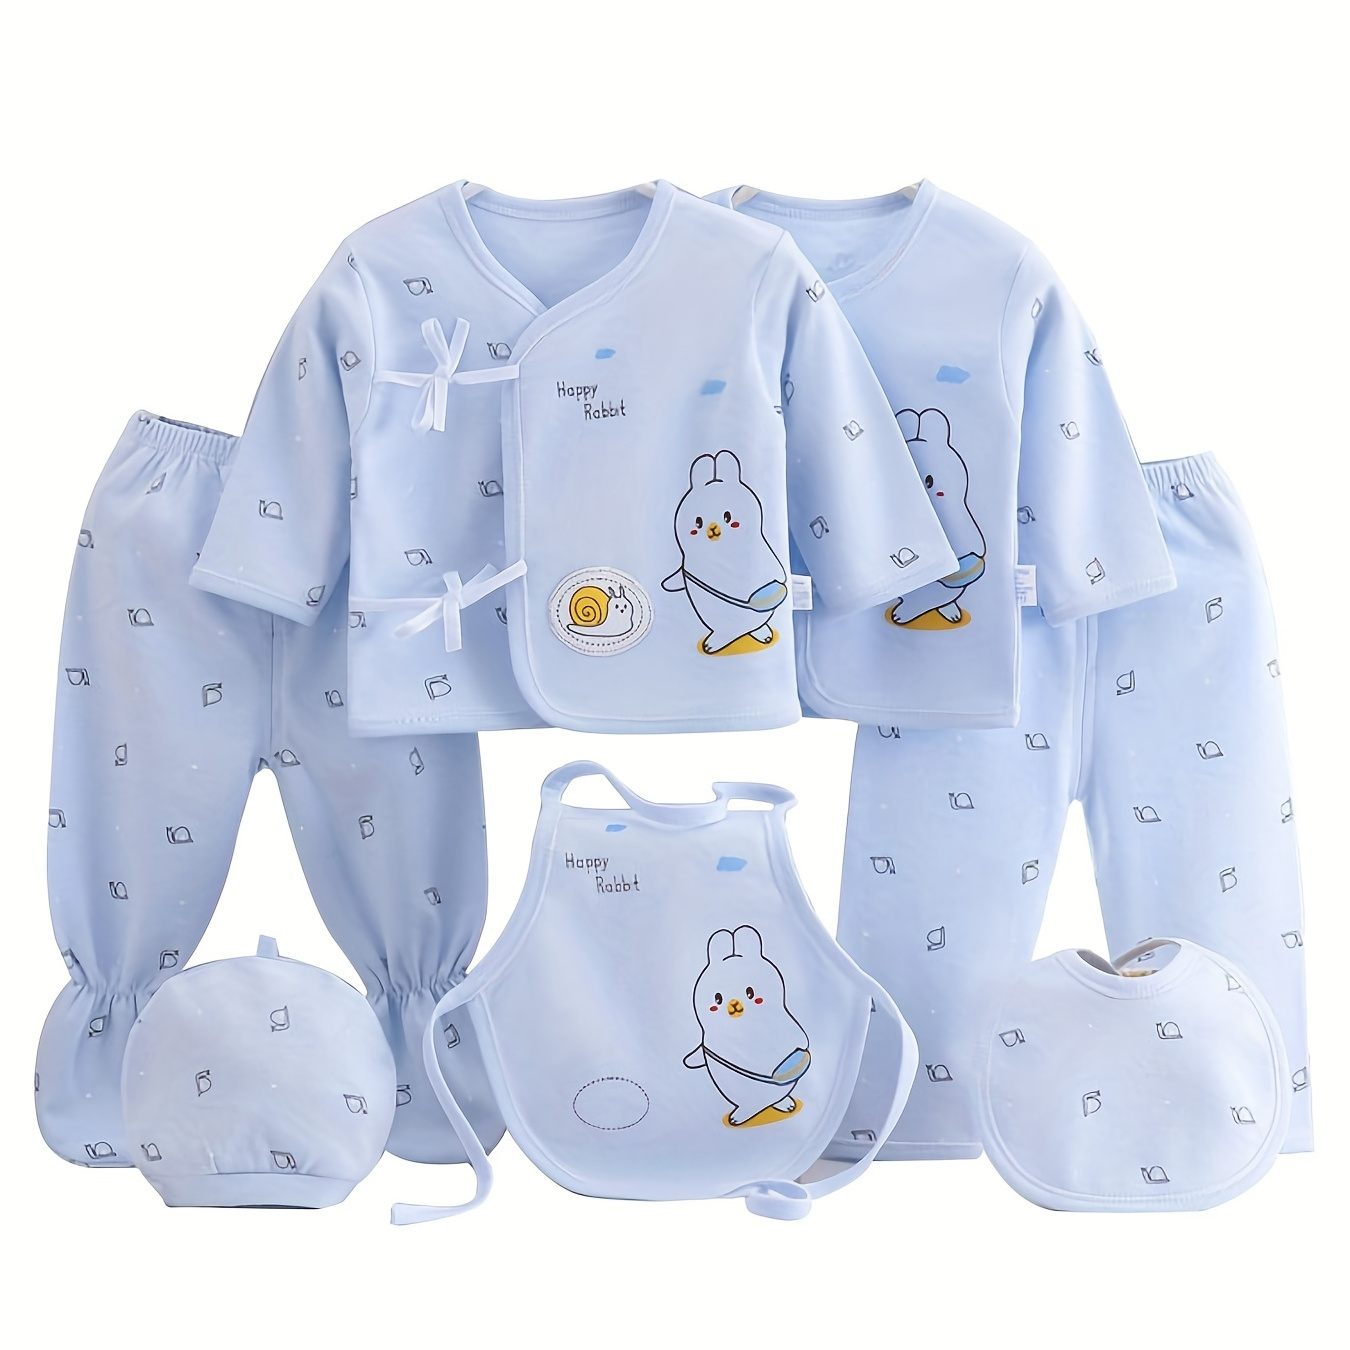 

7pcs Newborn Outfits Gifts, Cute Graphic Baby Boys Girls Cotton Comfy Clothes Set - Footed Pants Cardigan Top Trousers Hat Bib Set